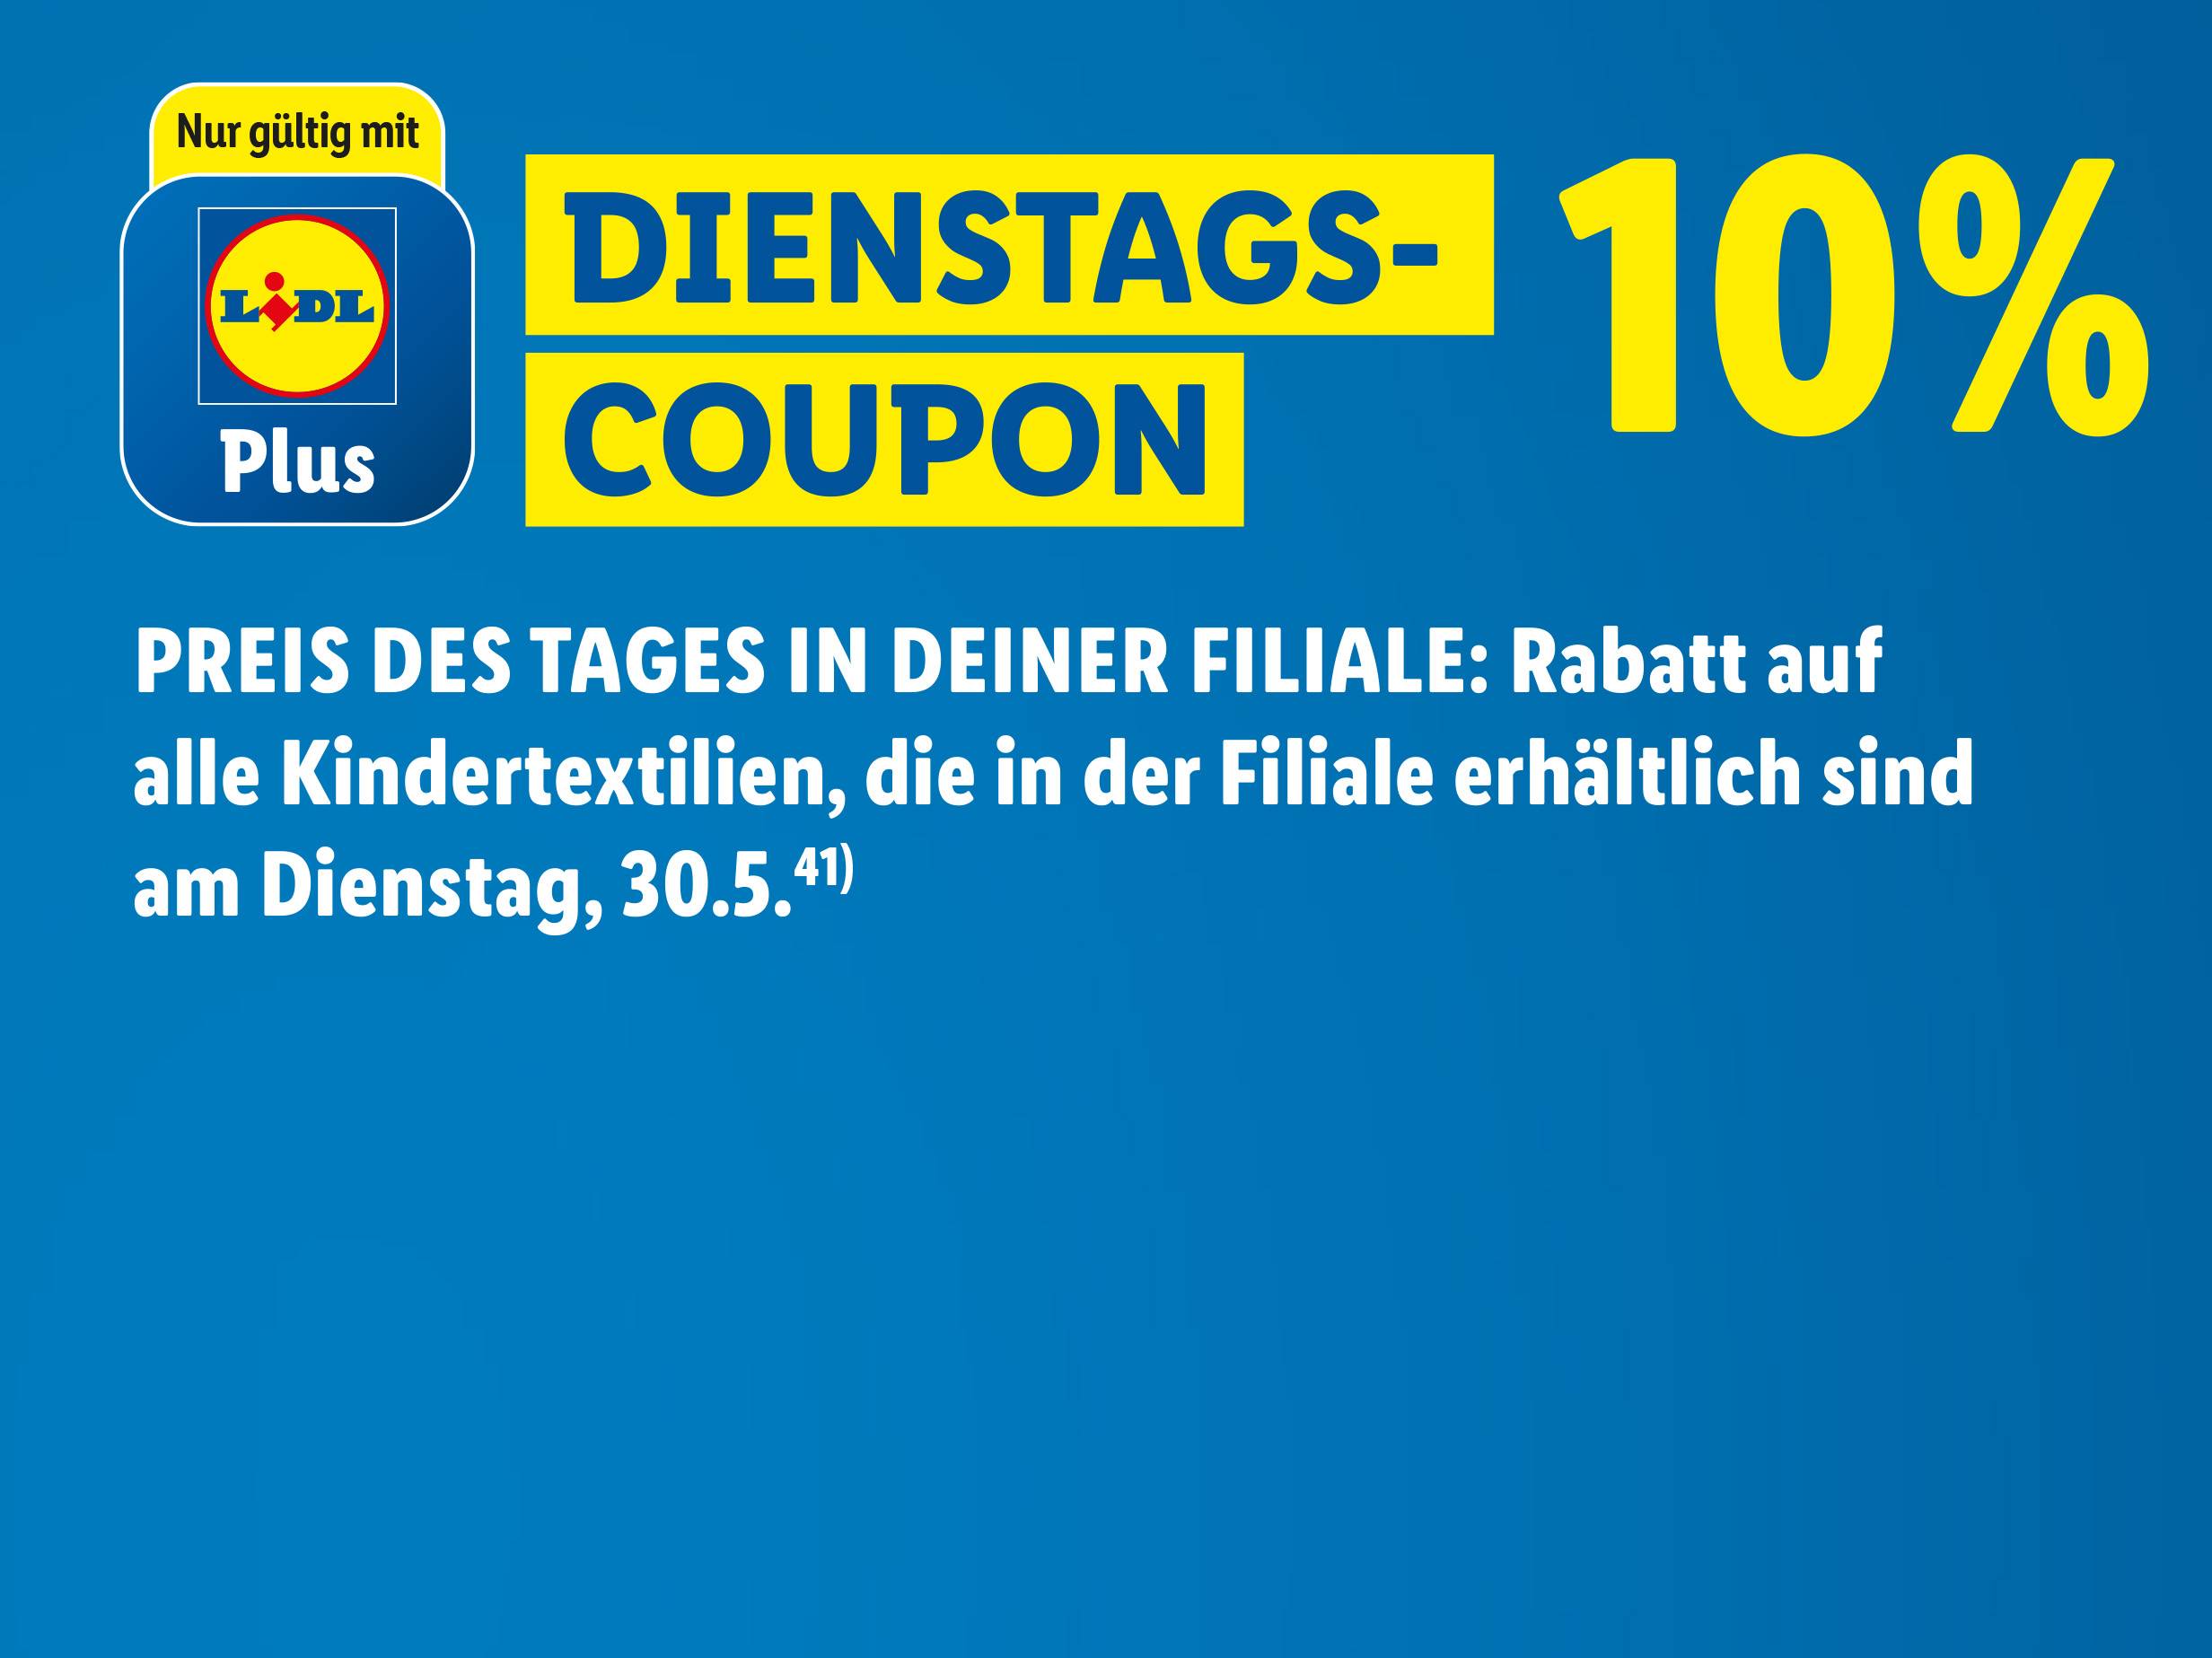 DIENSTAGS-COUPON